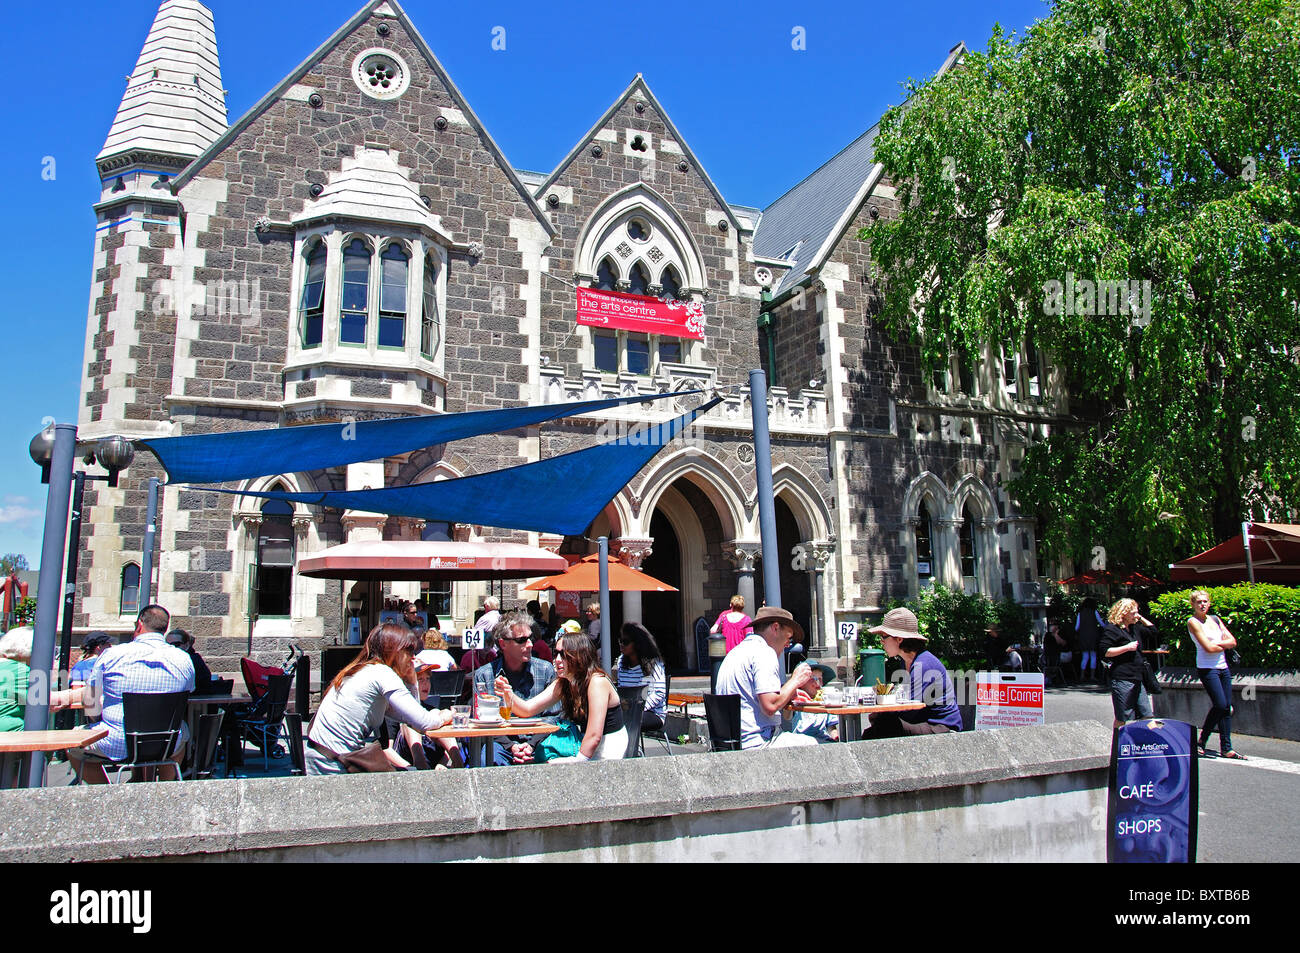 Coffee Corner Cafe, The Arts Centre, Worcester Boulevard, Christchurch, Canterbury Region, South Island, New Zealand Stock Photo